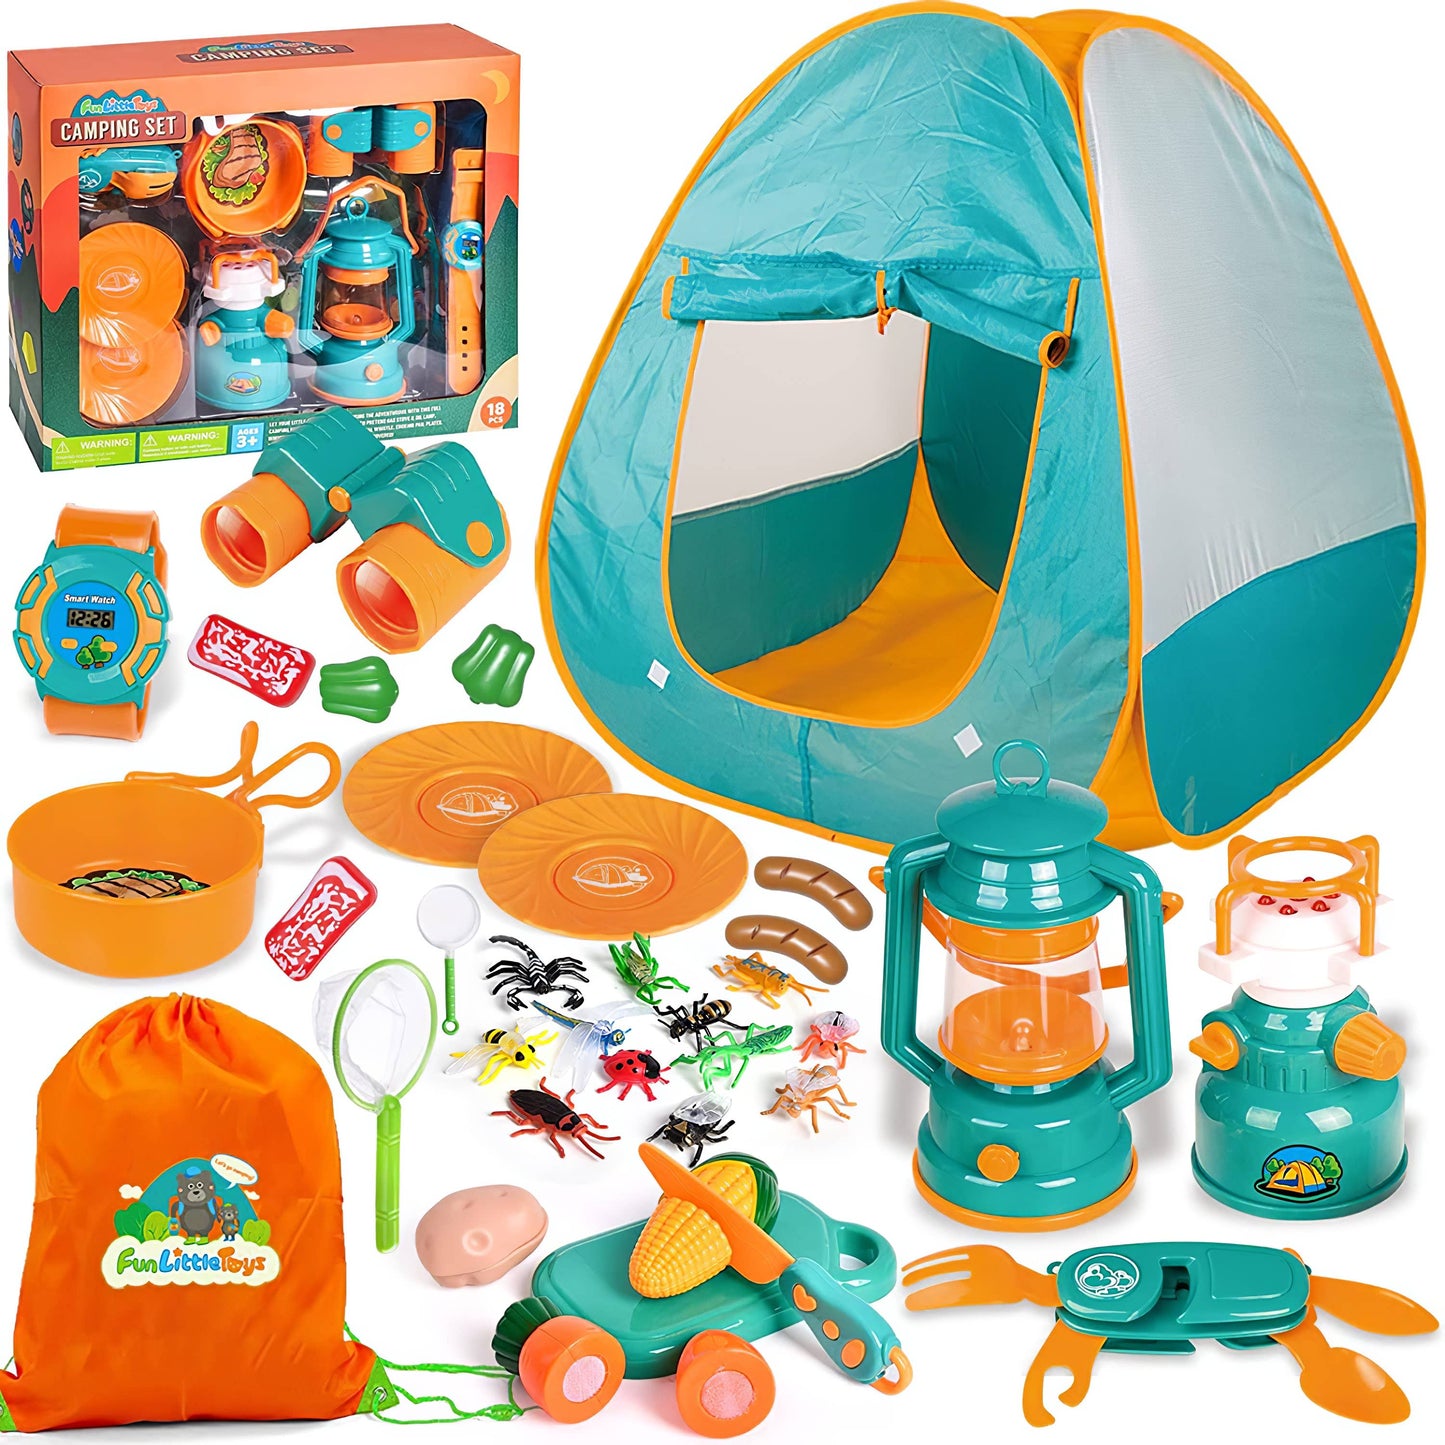 Camping Tent with Bug Catcher and Food 36 pcs